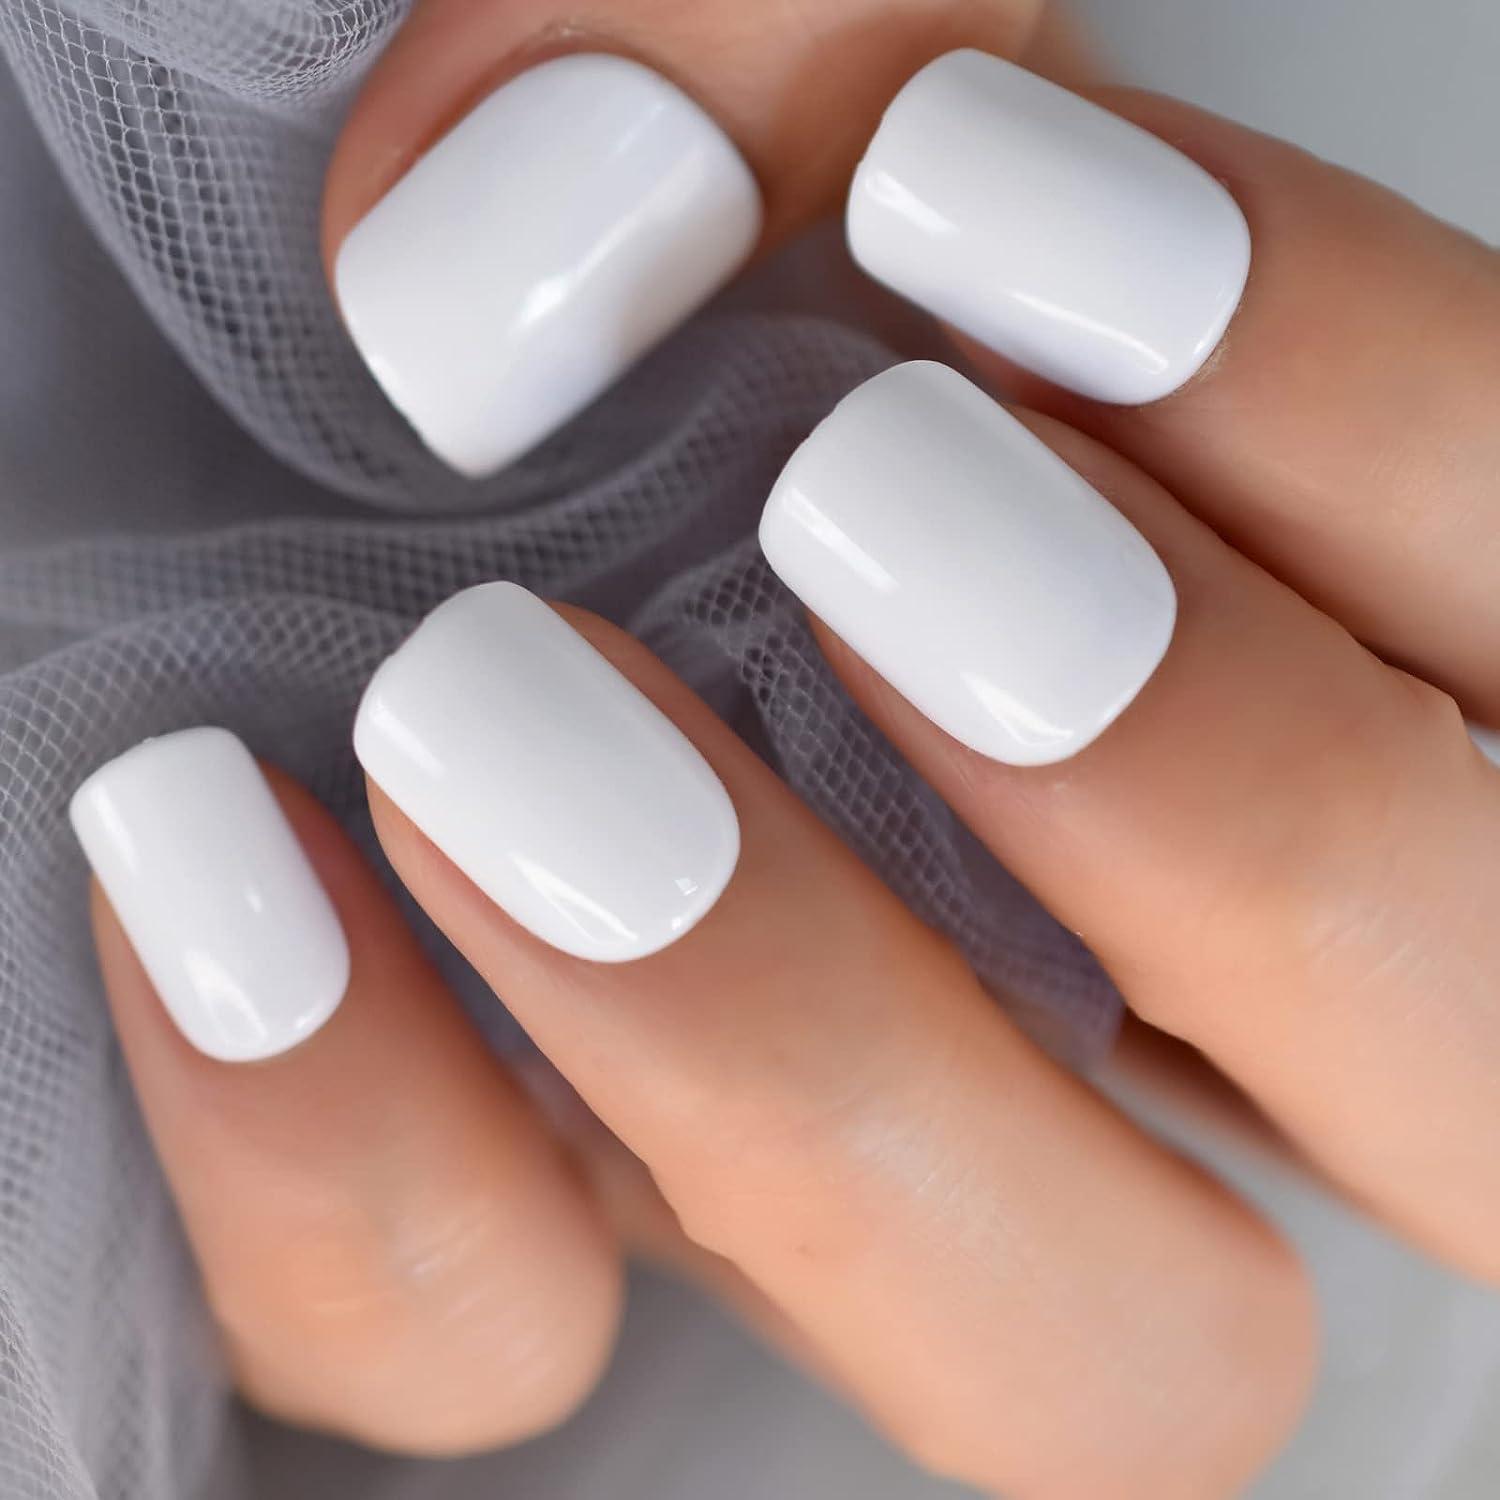 Gel Manicures on Short Nails Are the Most Popular Nail Trend for Fall |  Allure